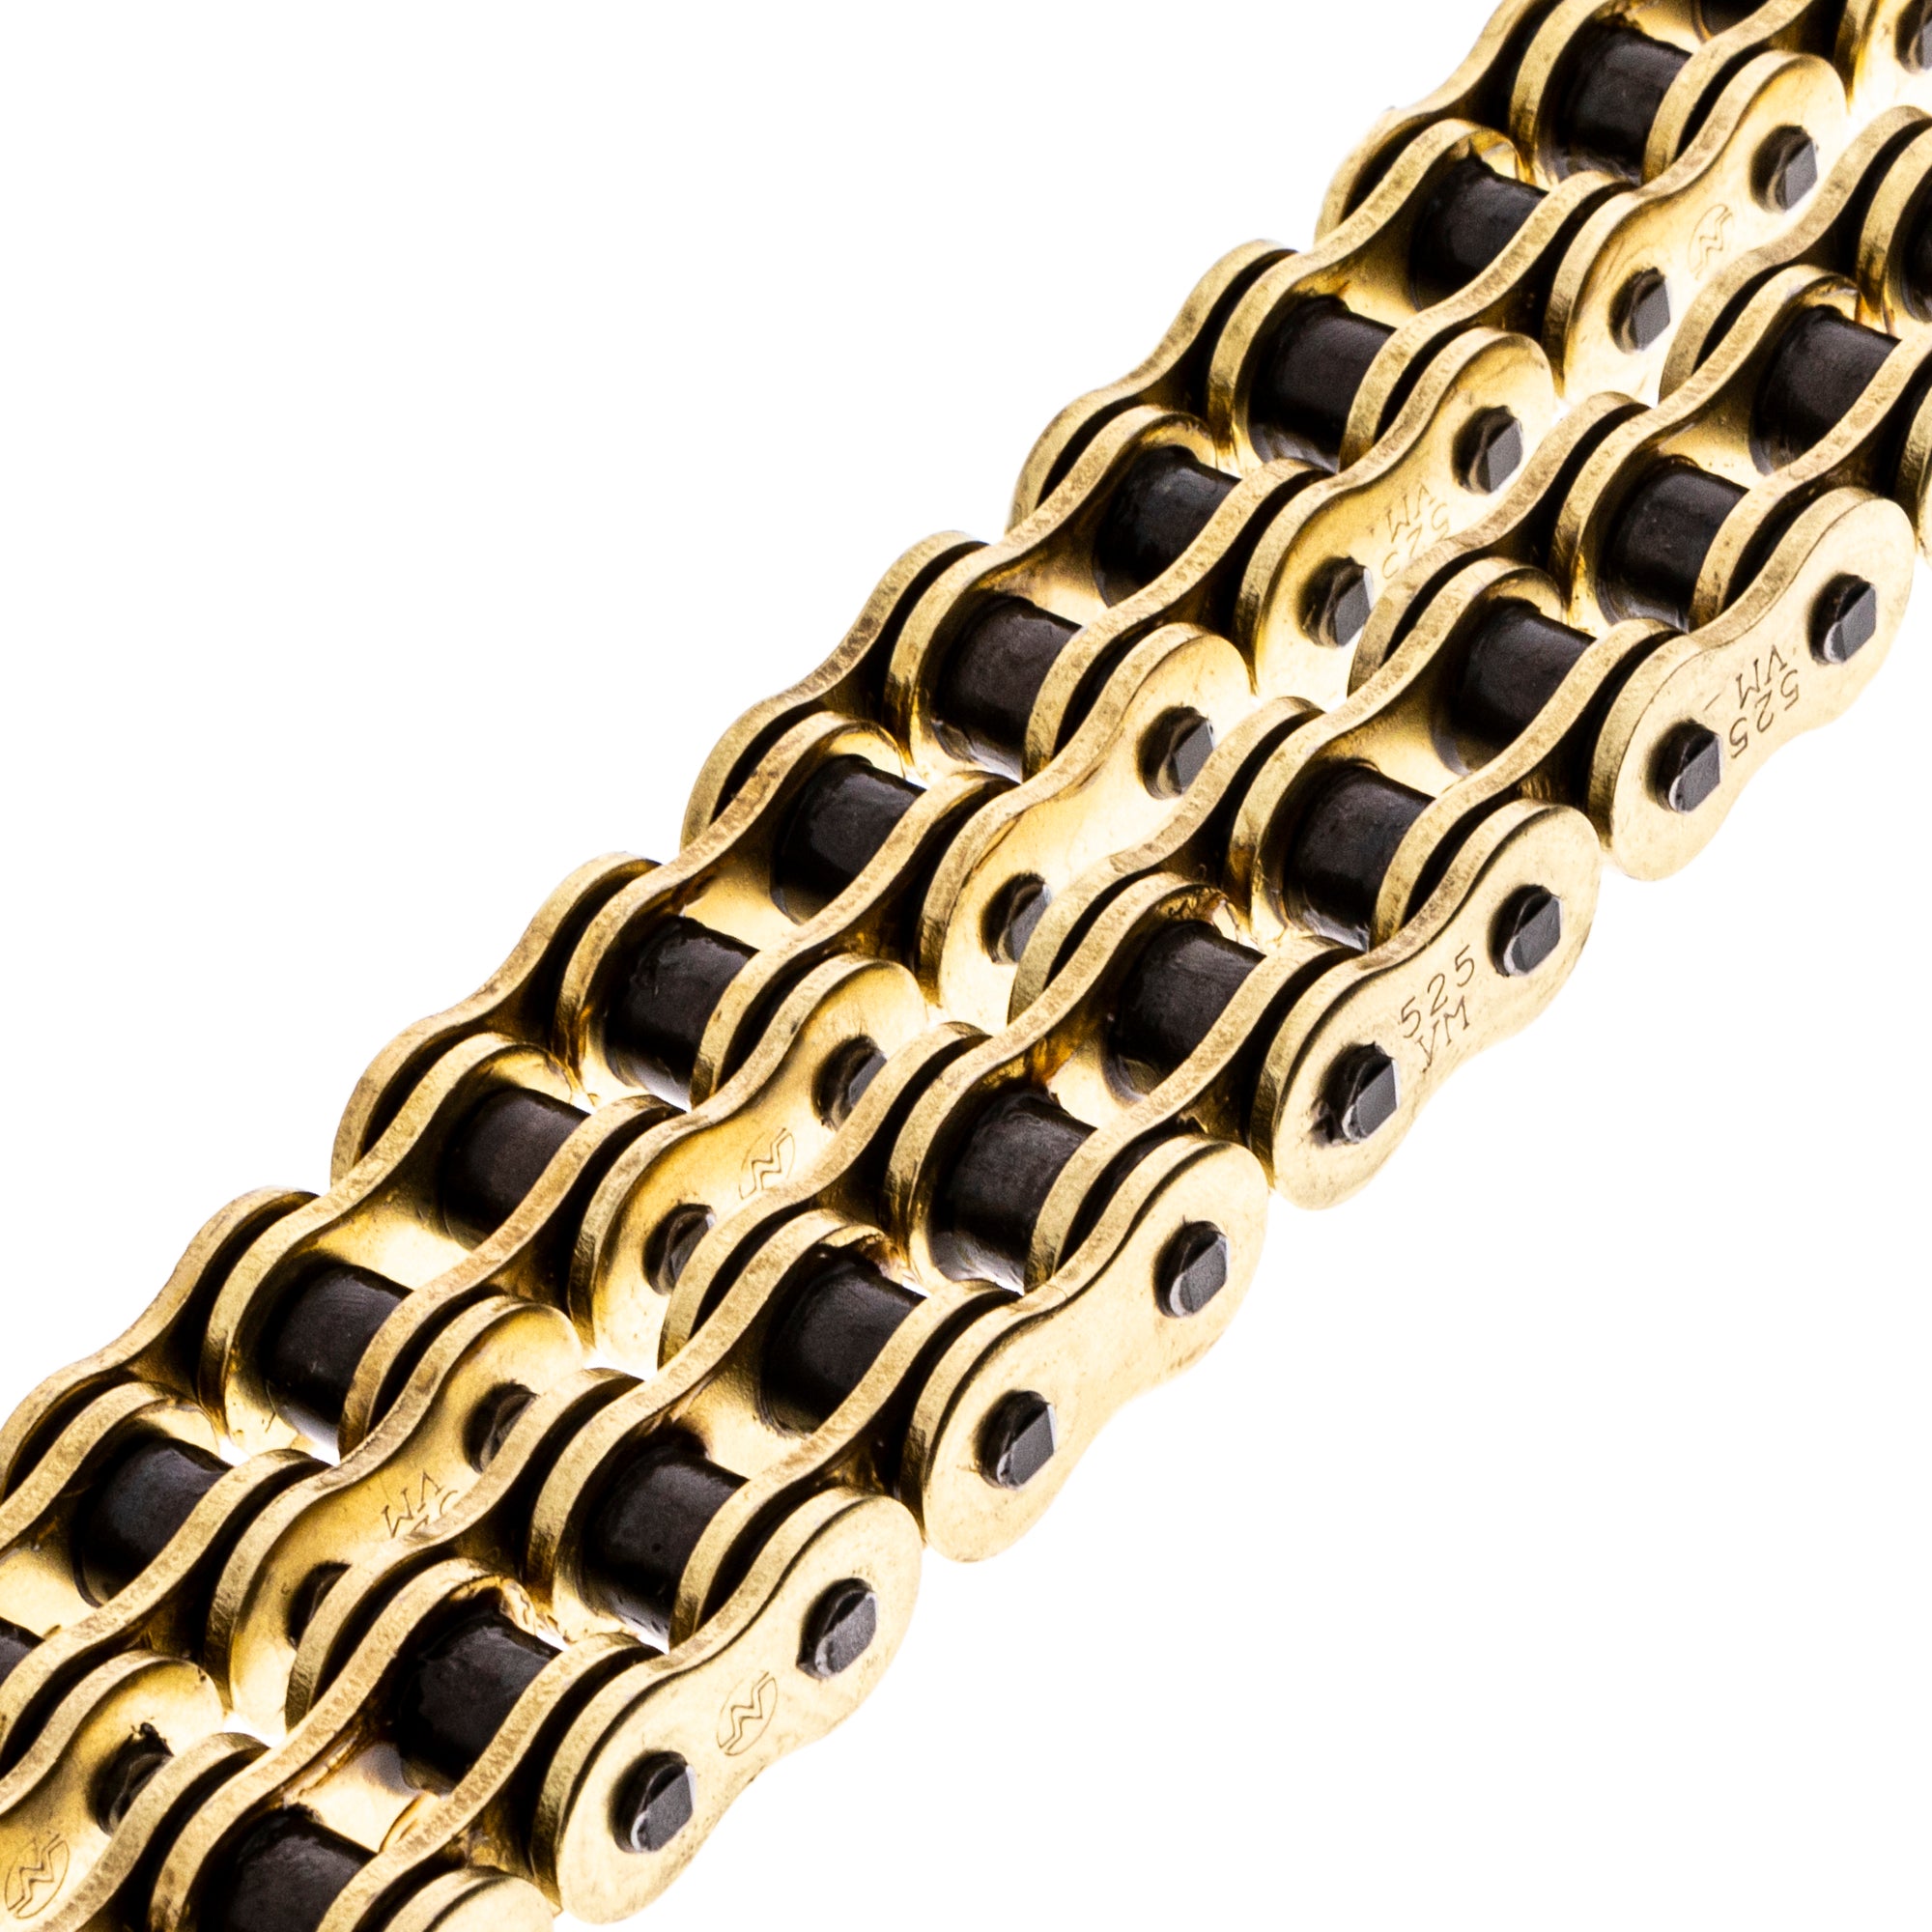 Gold X-Ring Chain 96 w/ Master Link for zOTHER Ducati 749 67640371A 5519 525VX-96 NICHE 519-CDC2620H